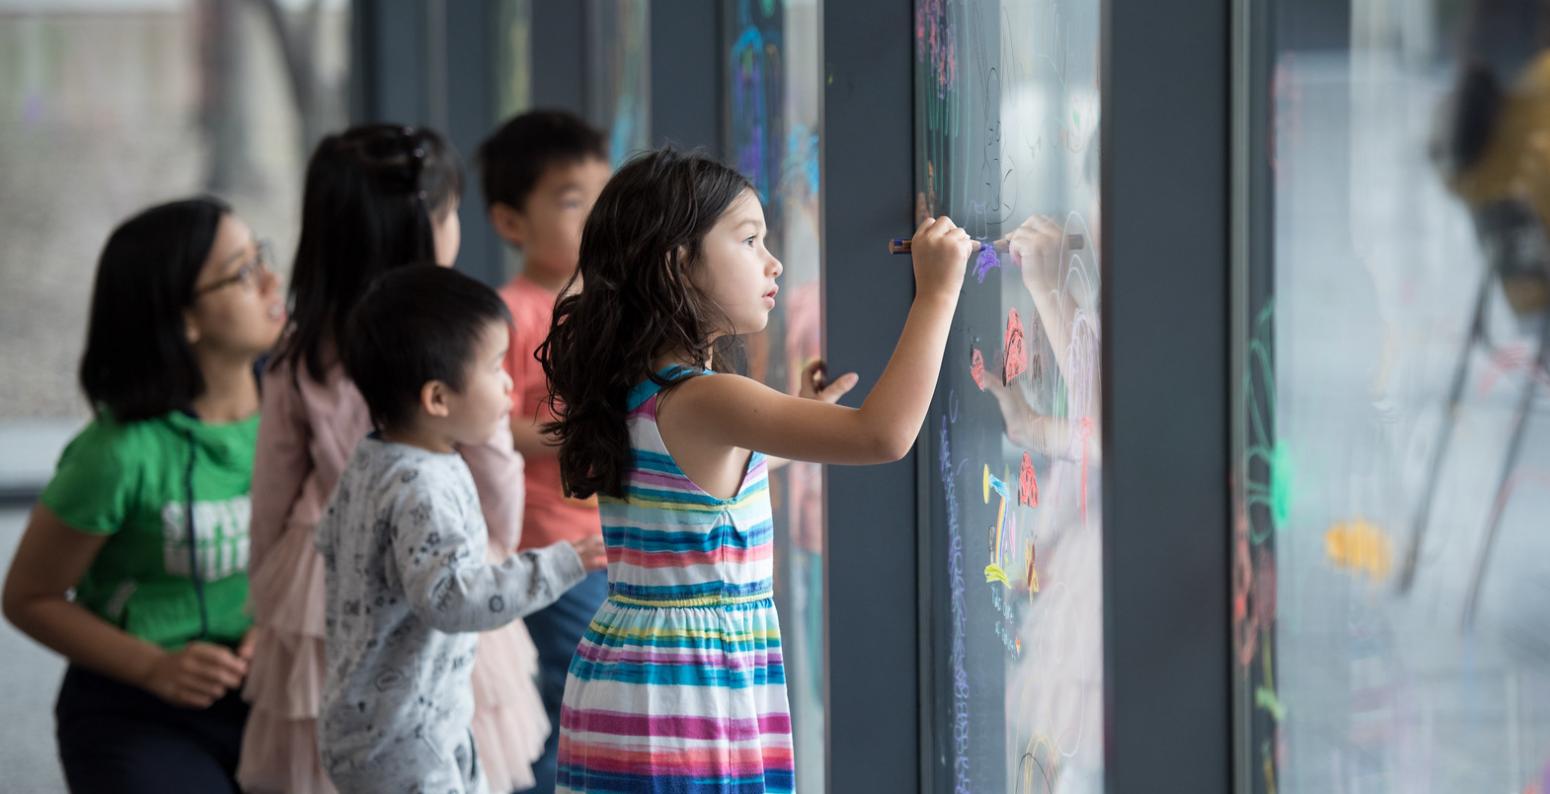 Children writing with Stabilo watercolor pencils on a large window.